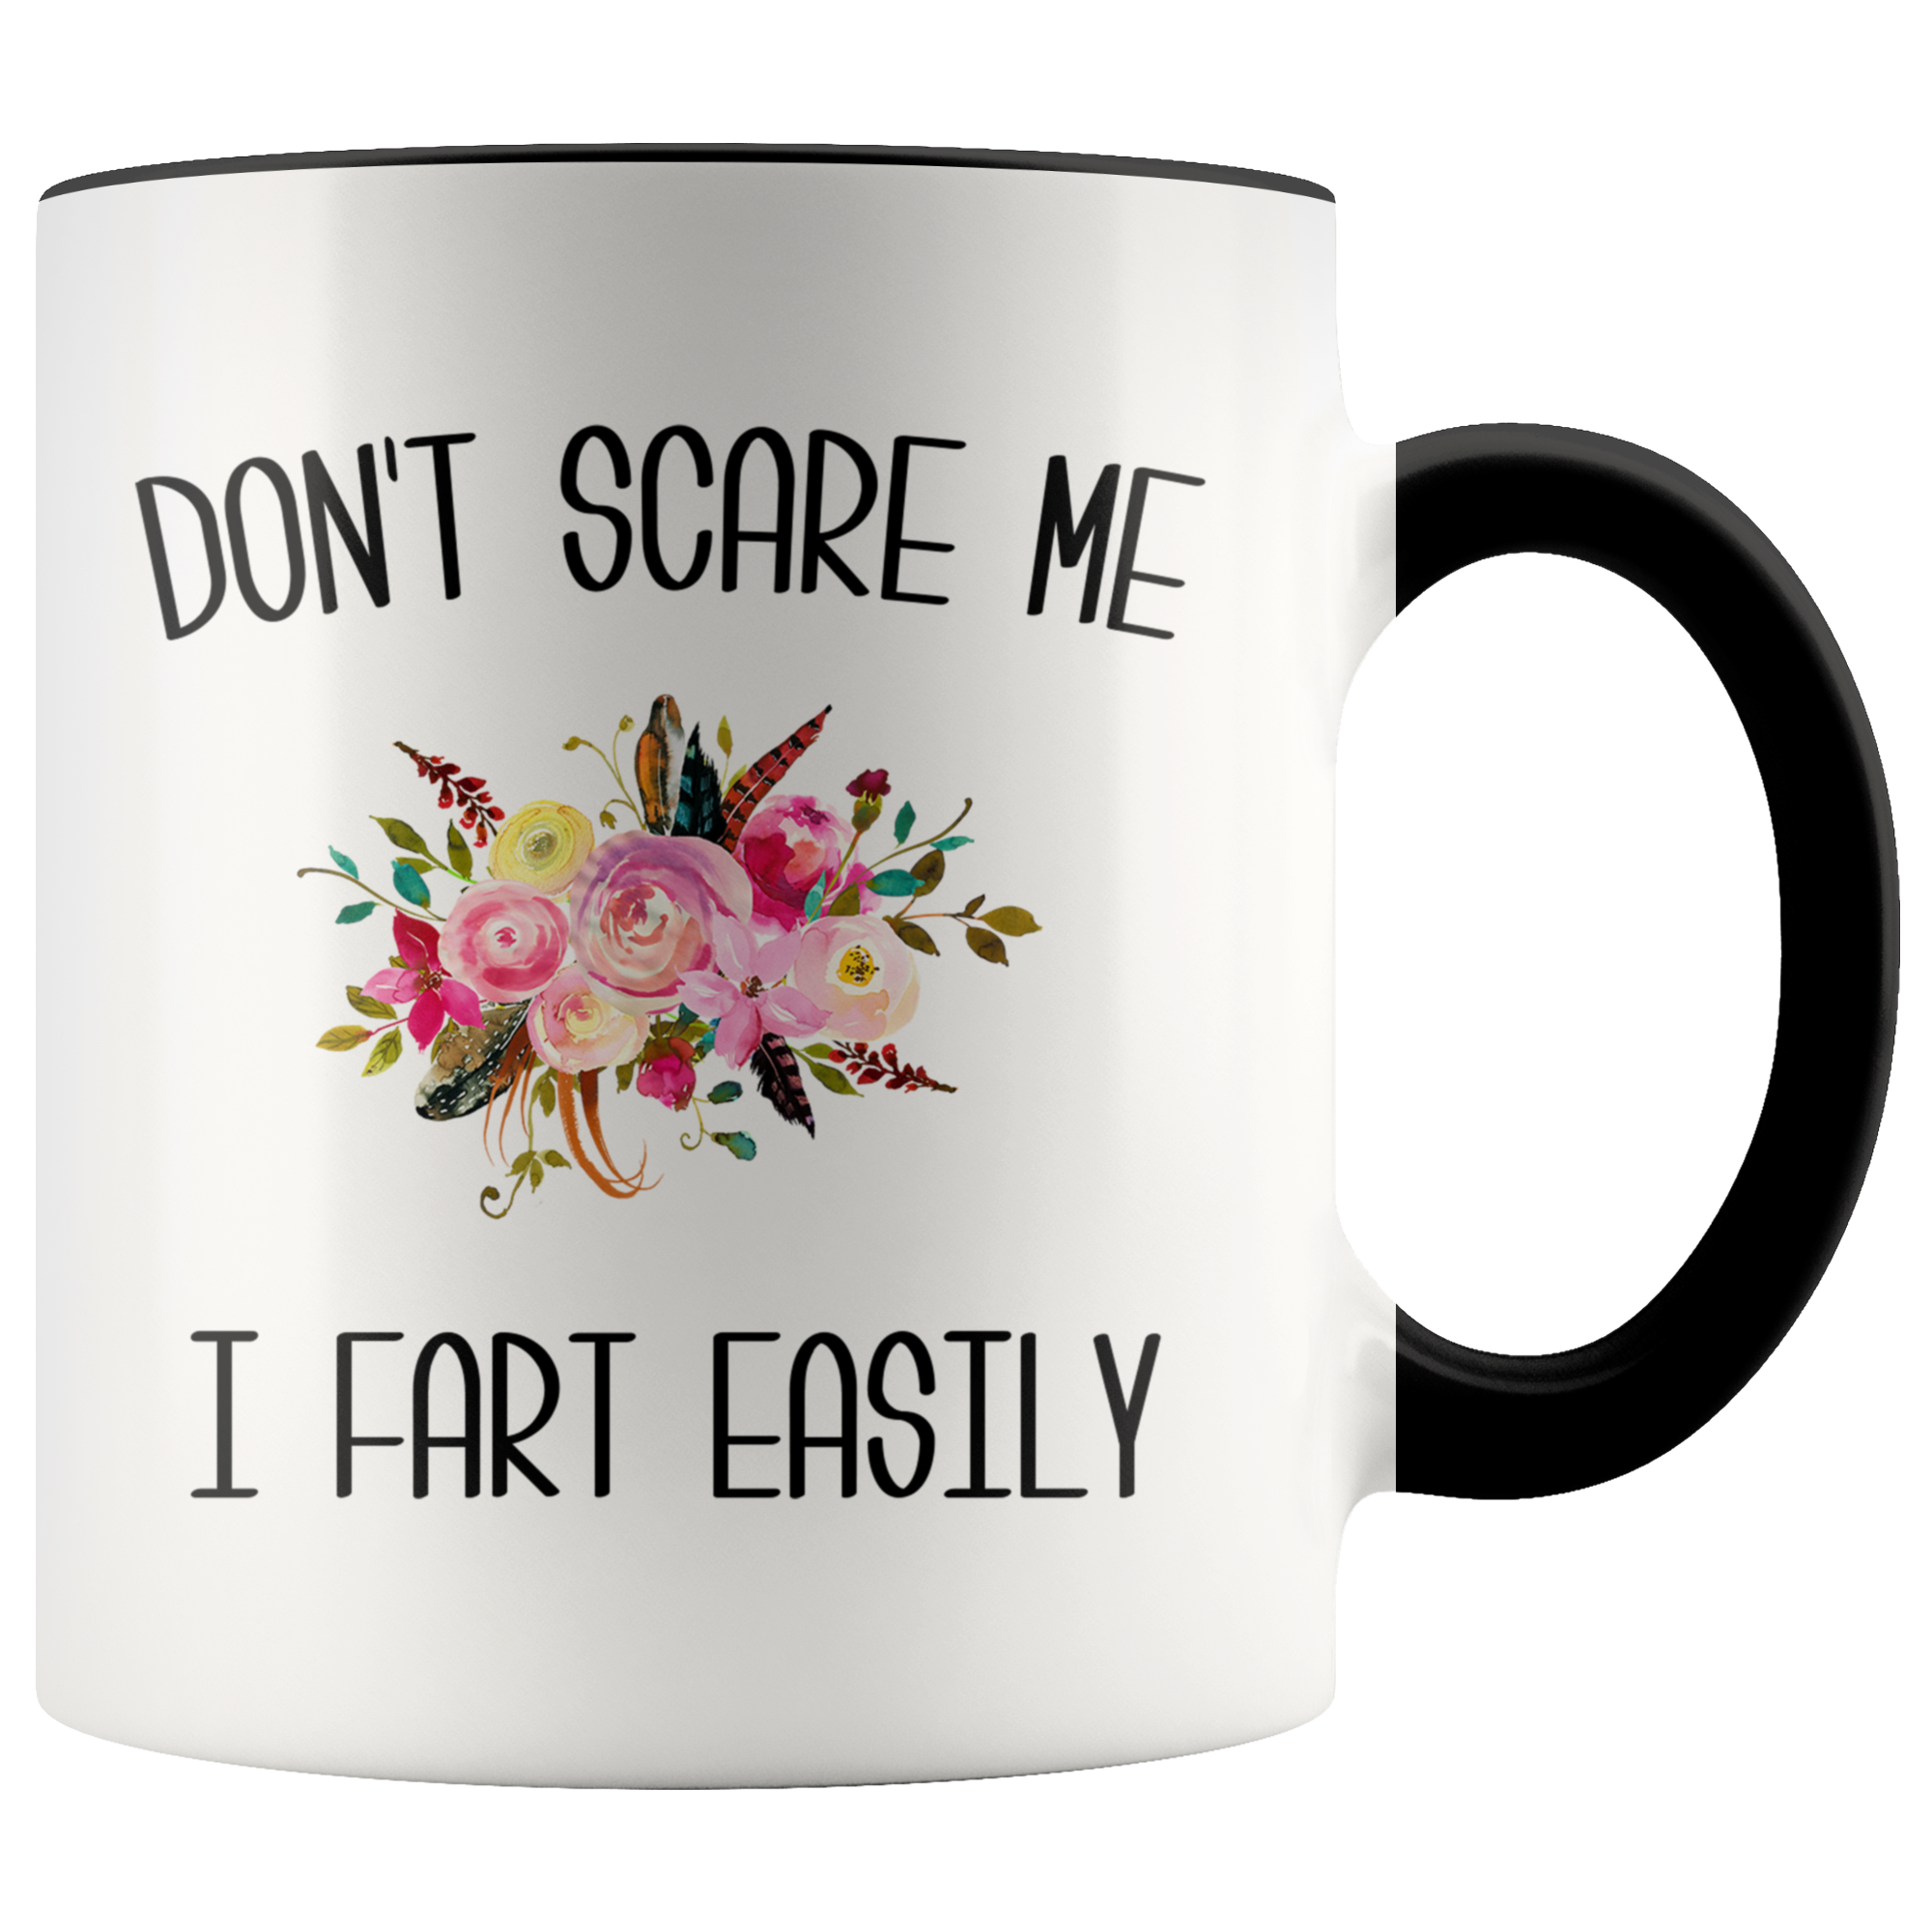 Funny Fart Mug Don't Scare Me I Fart Easily Coffee Cup Old Age Gag Gift Exchange Idea